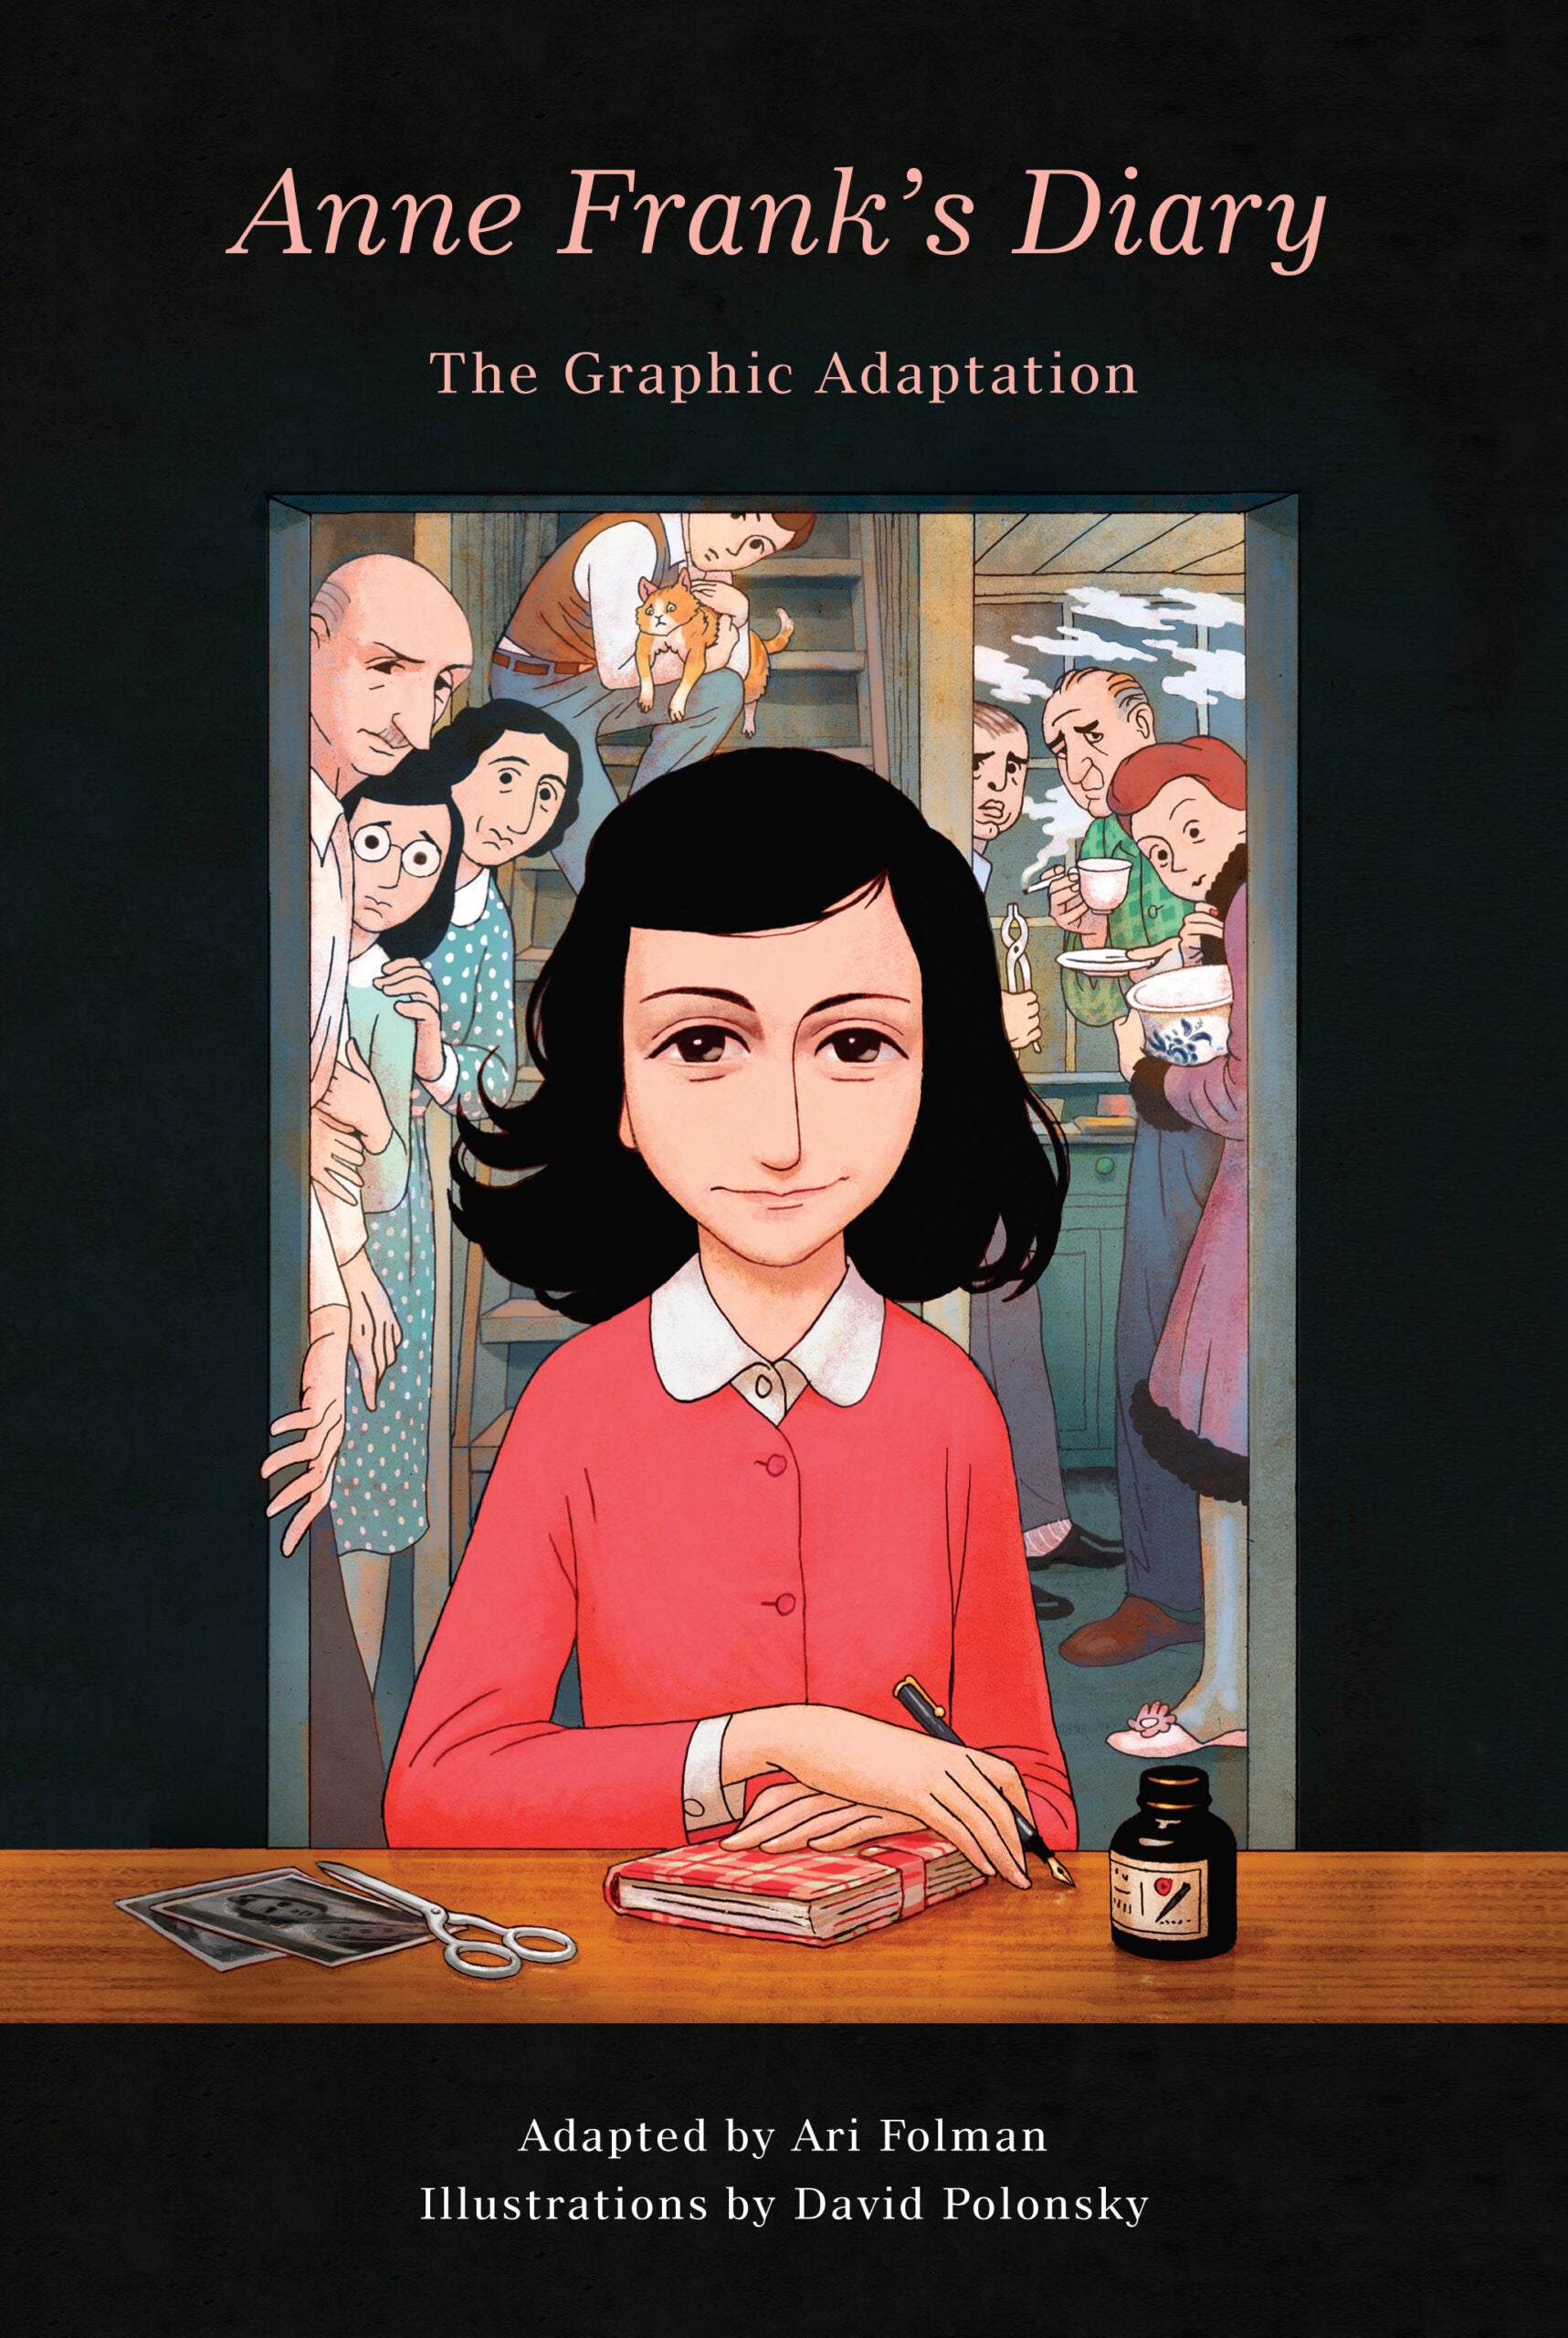 75th Anniversary – Anne Frank’s Diary: The Graphic Adaptation